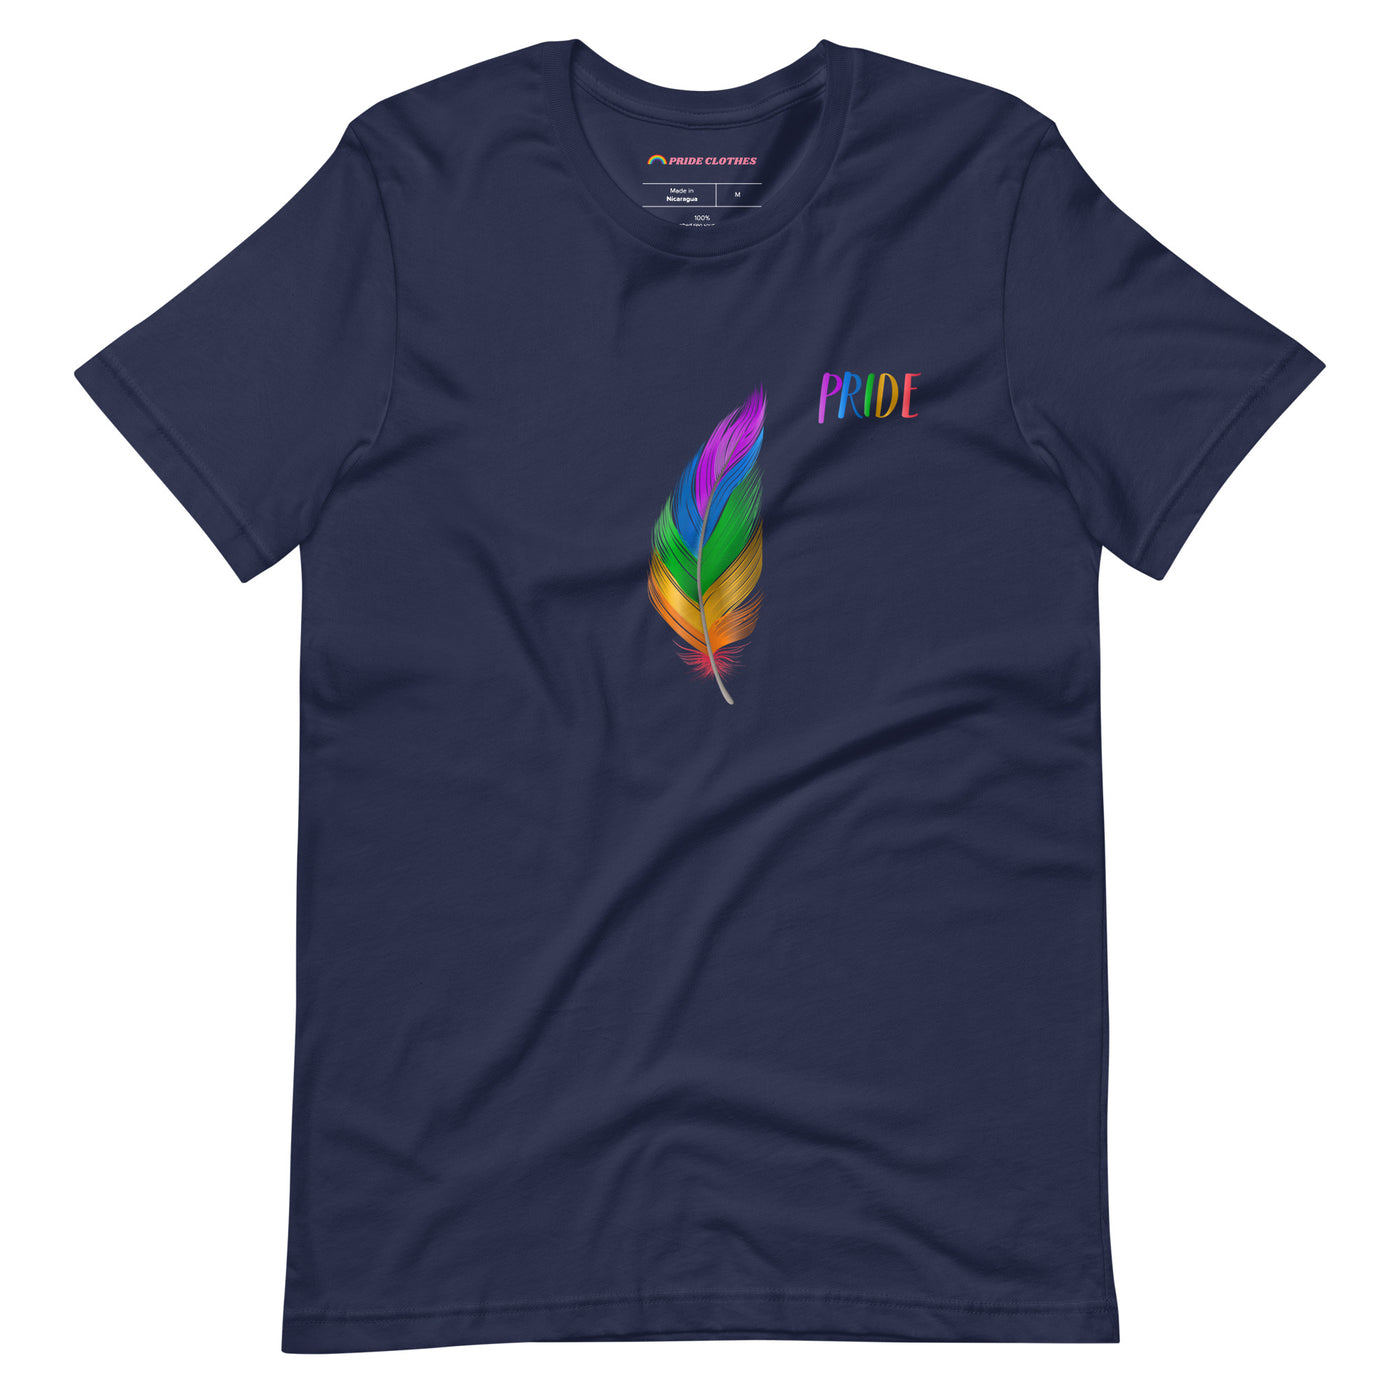 Pride Clothes - A Pride Feather Shirt That Can Make You Look and Feel Your Best - Navy